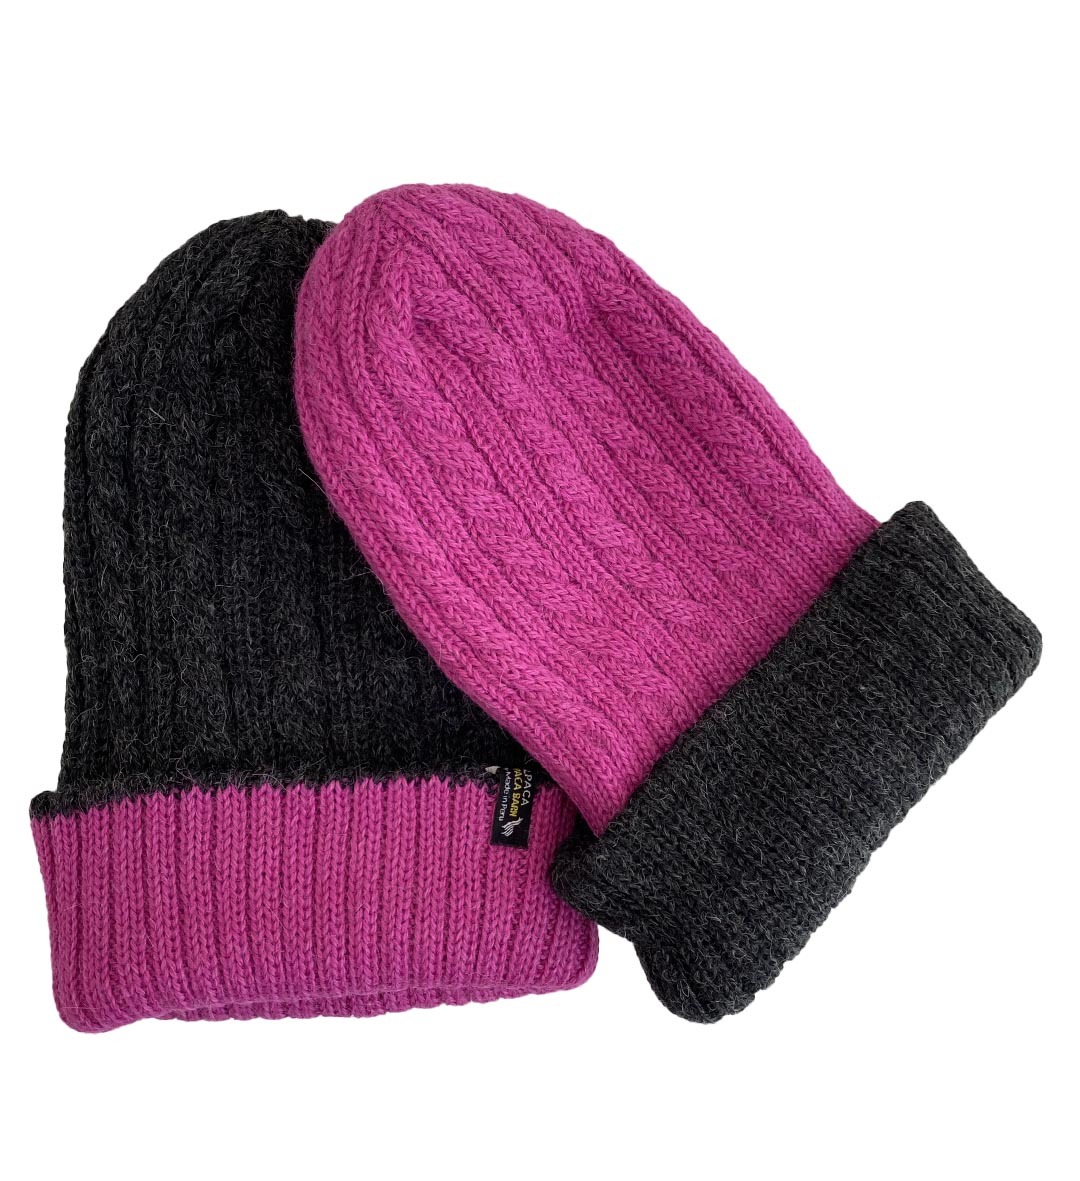 Reversible Hand Knit Alpaca Beanie Hot - Pink/Charcoal - 3